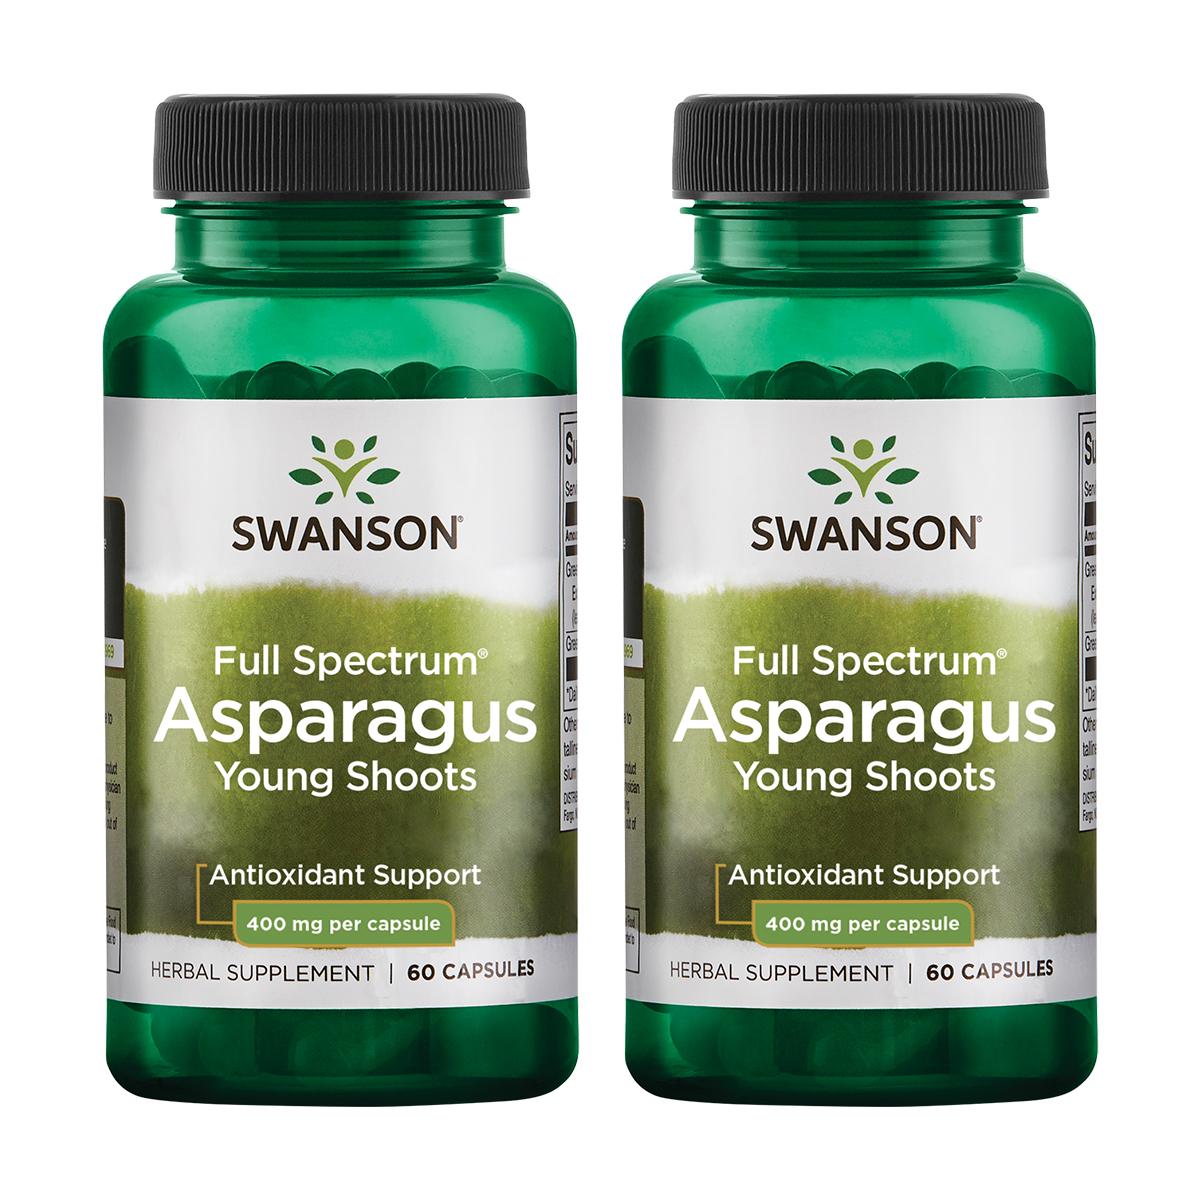 Swanson Premium Full Spectrum Asparagus Young Shoots 2 Pack Supplement Vitamin 400 mg 60 Caps Herbs and Supplements